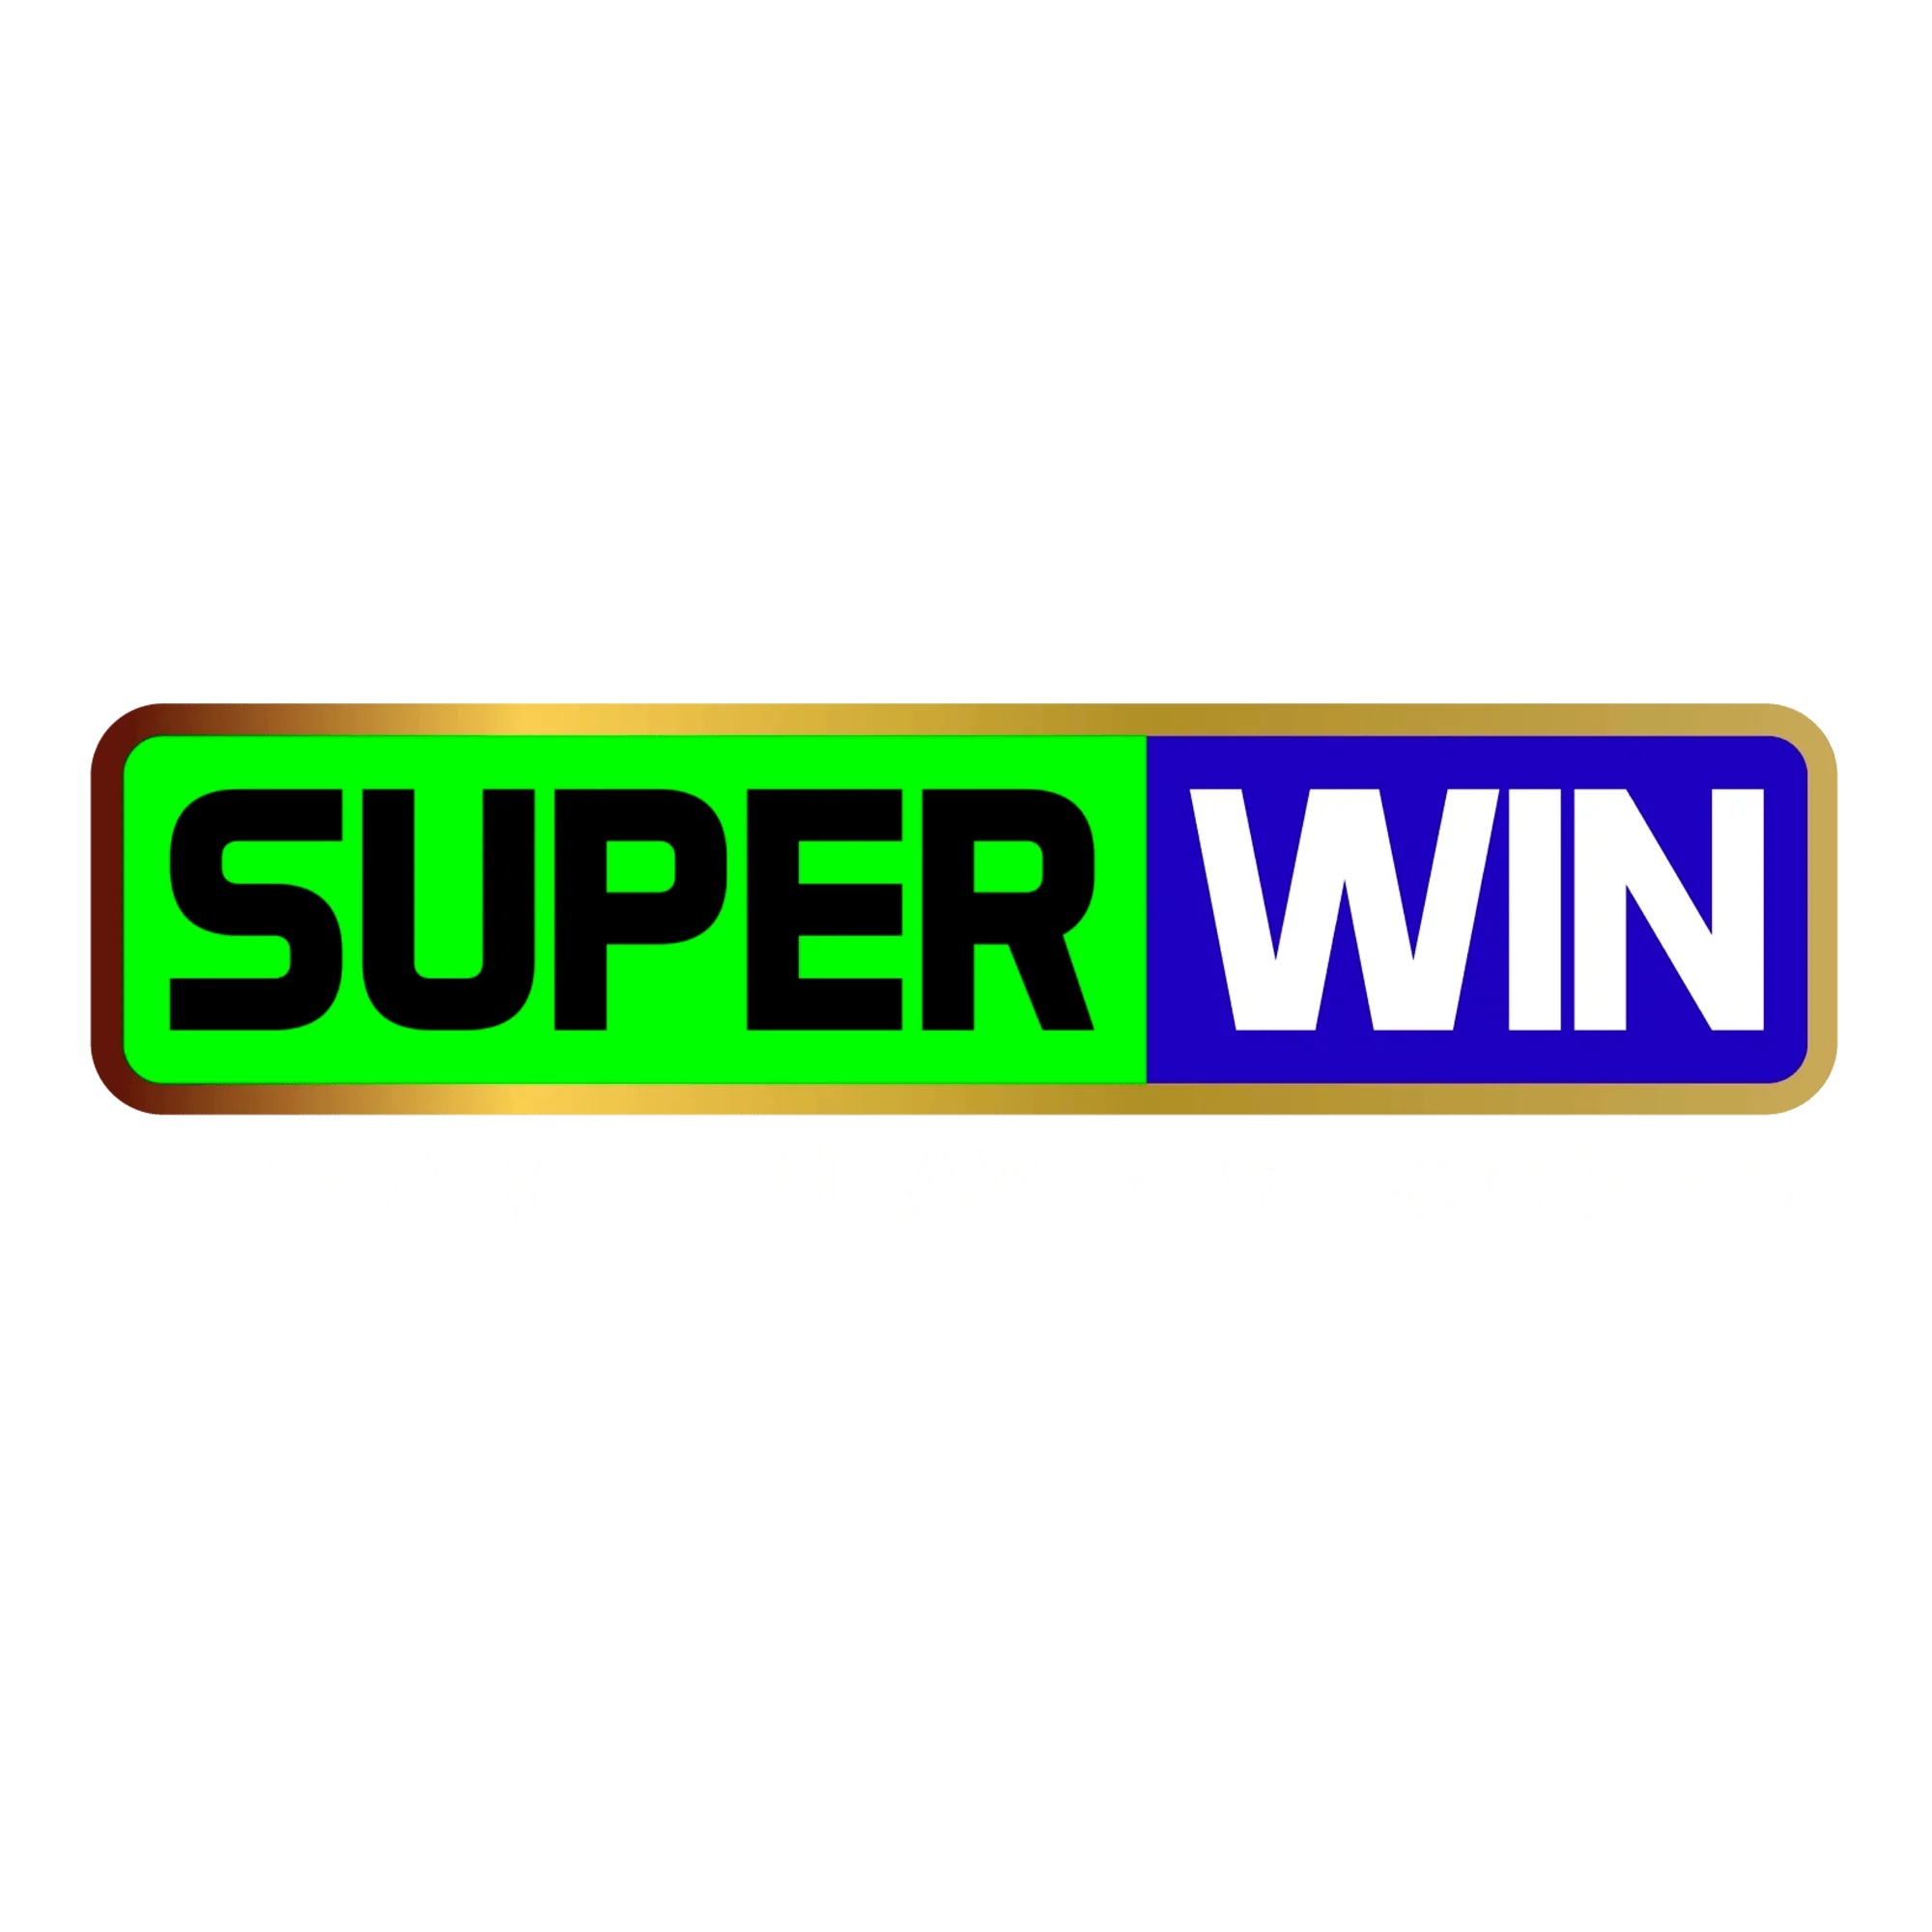 SuperWin Review